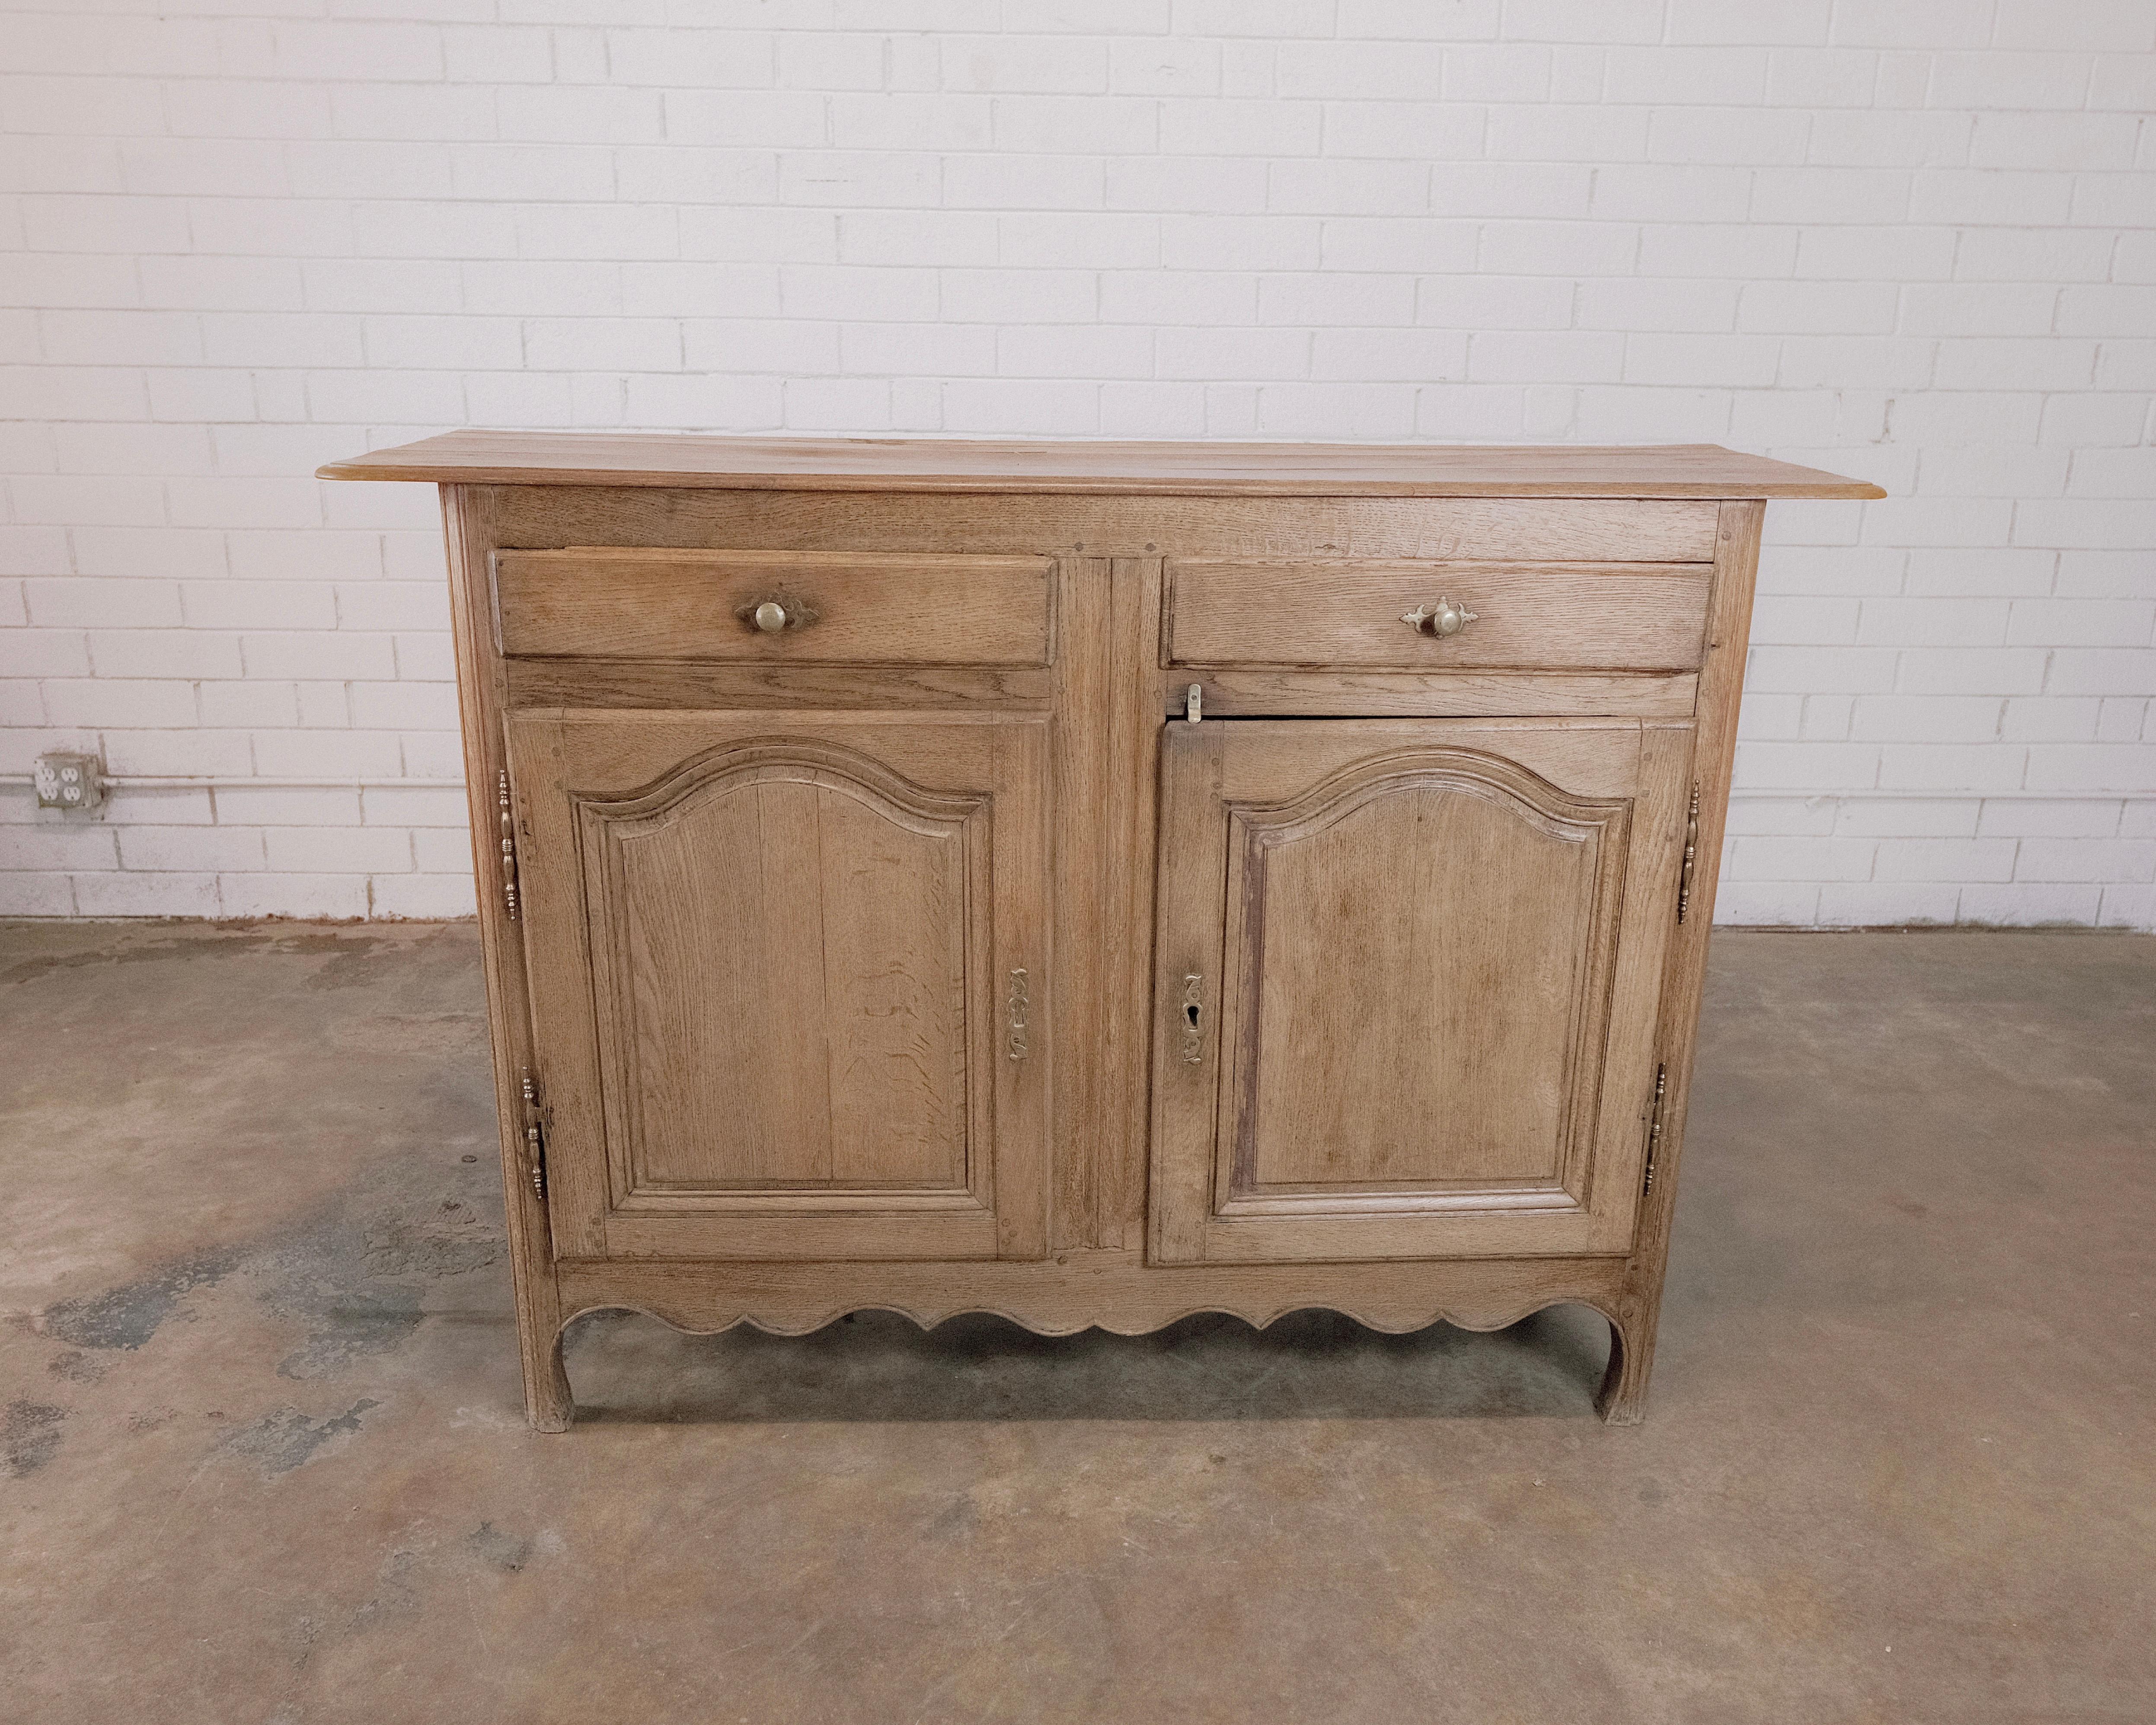 19th Century Antique French Oak Cabinet with drawers and beautiful brass hardware. Crafted with meticulous artistry from sturdy oak, this piece stands as a testament to the rustic elegance of a bygone era.

The rich, weathered oak exudes a warmth